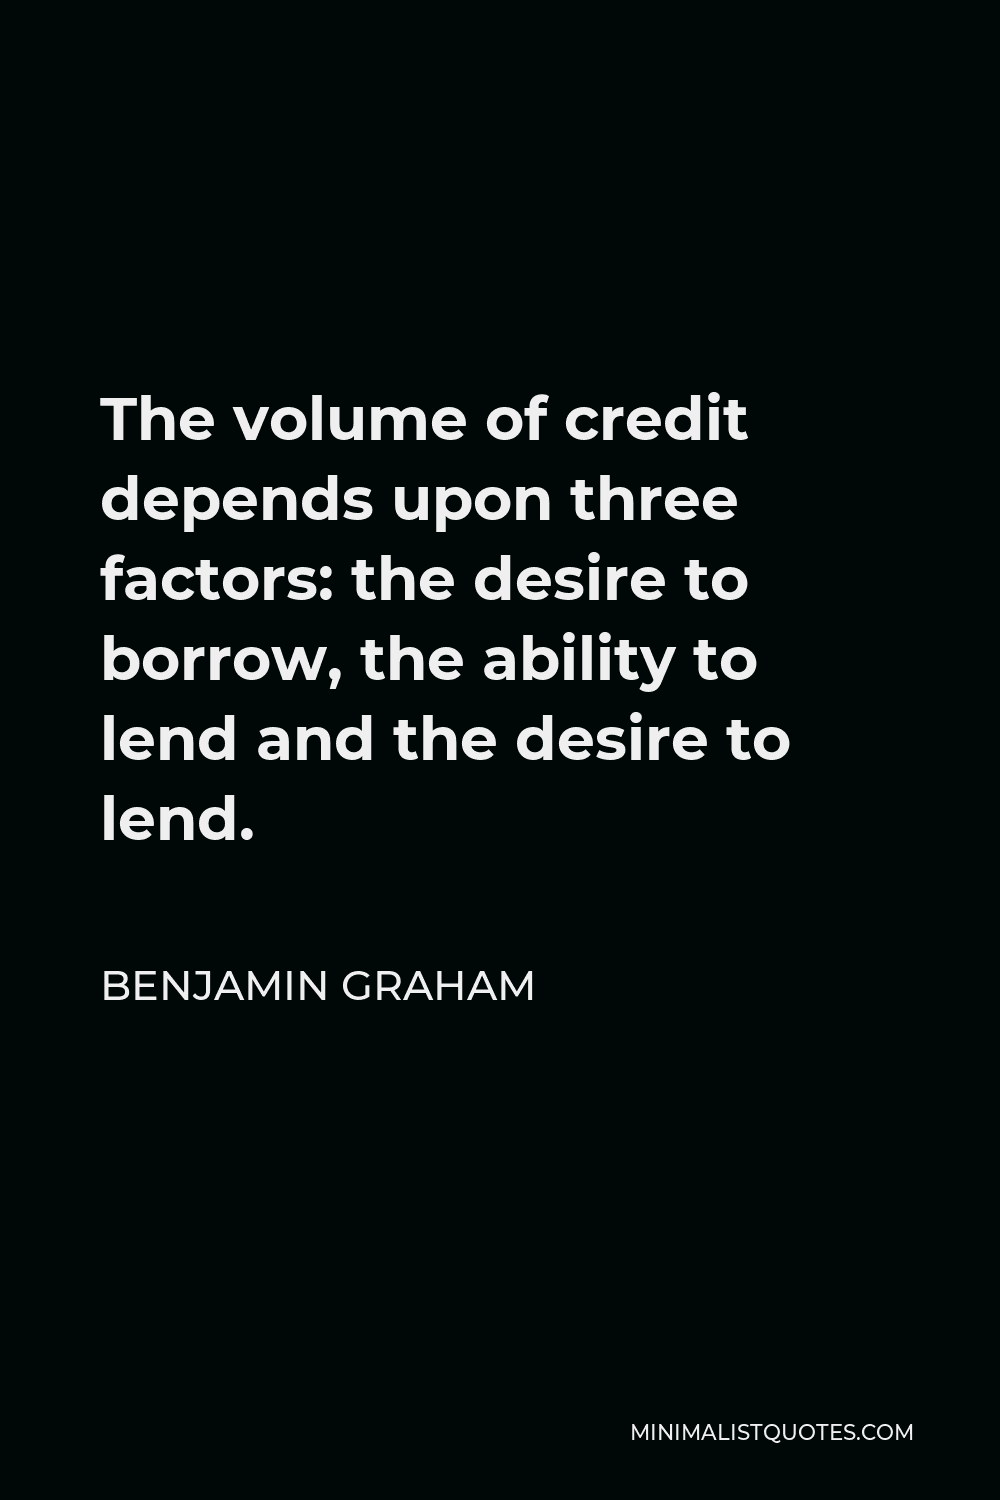 Benjamin Graham Quote - The volume of credit depends upon three factors: the desire to borrow, the ability to lend and the desire to lend.